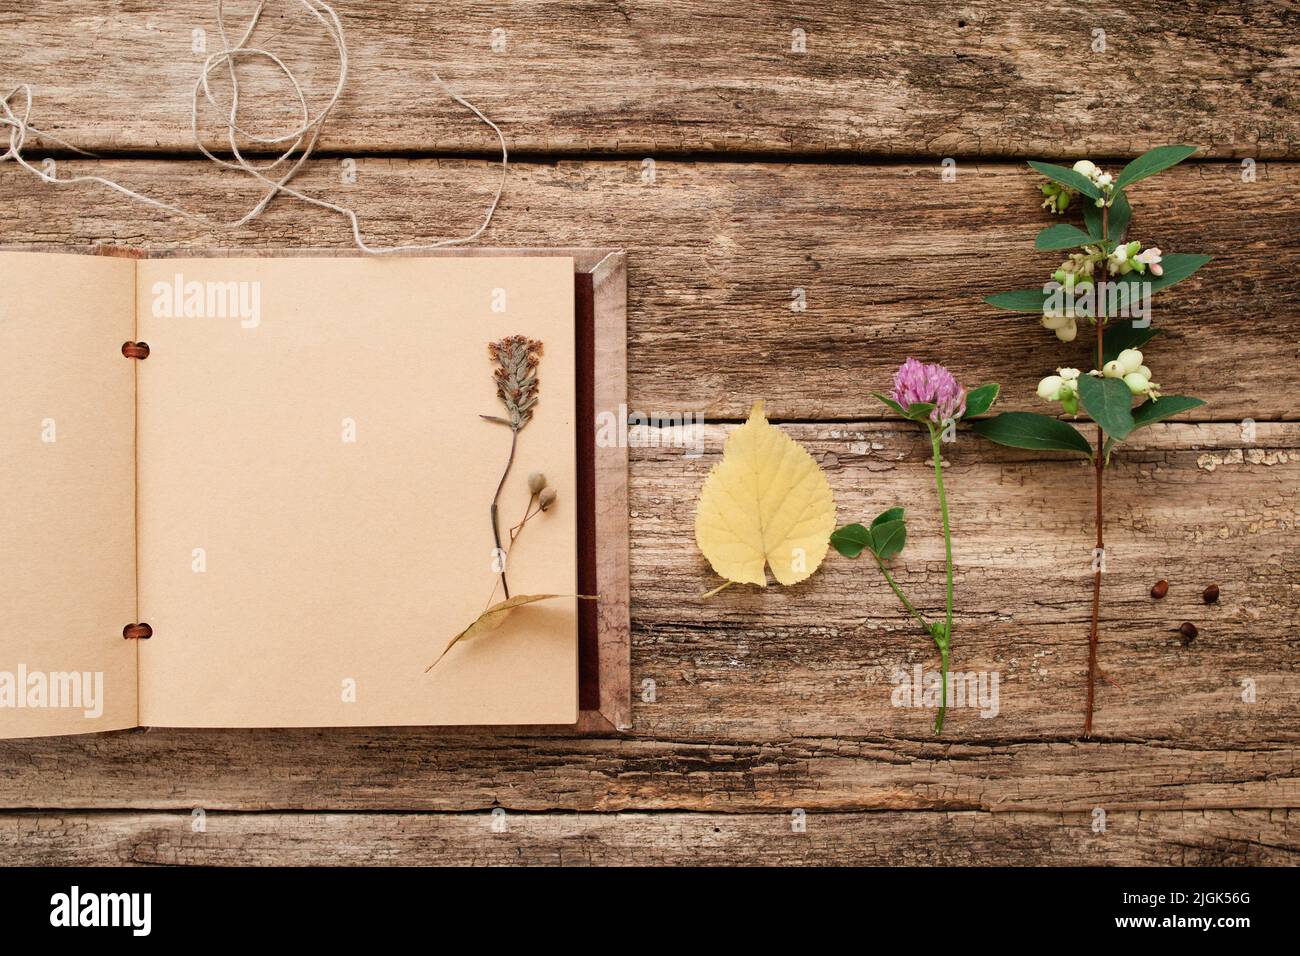 Drying up plants in scrapbook, flat lay Stock Photo